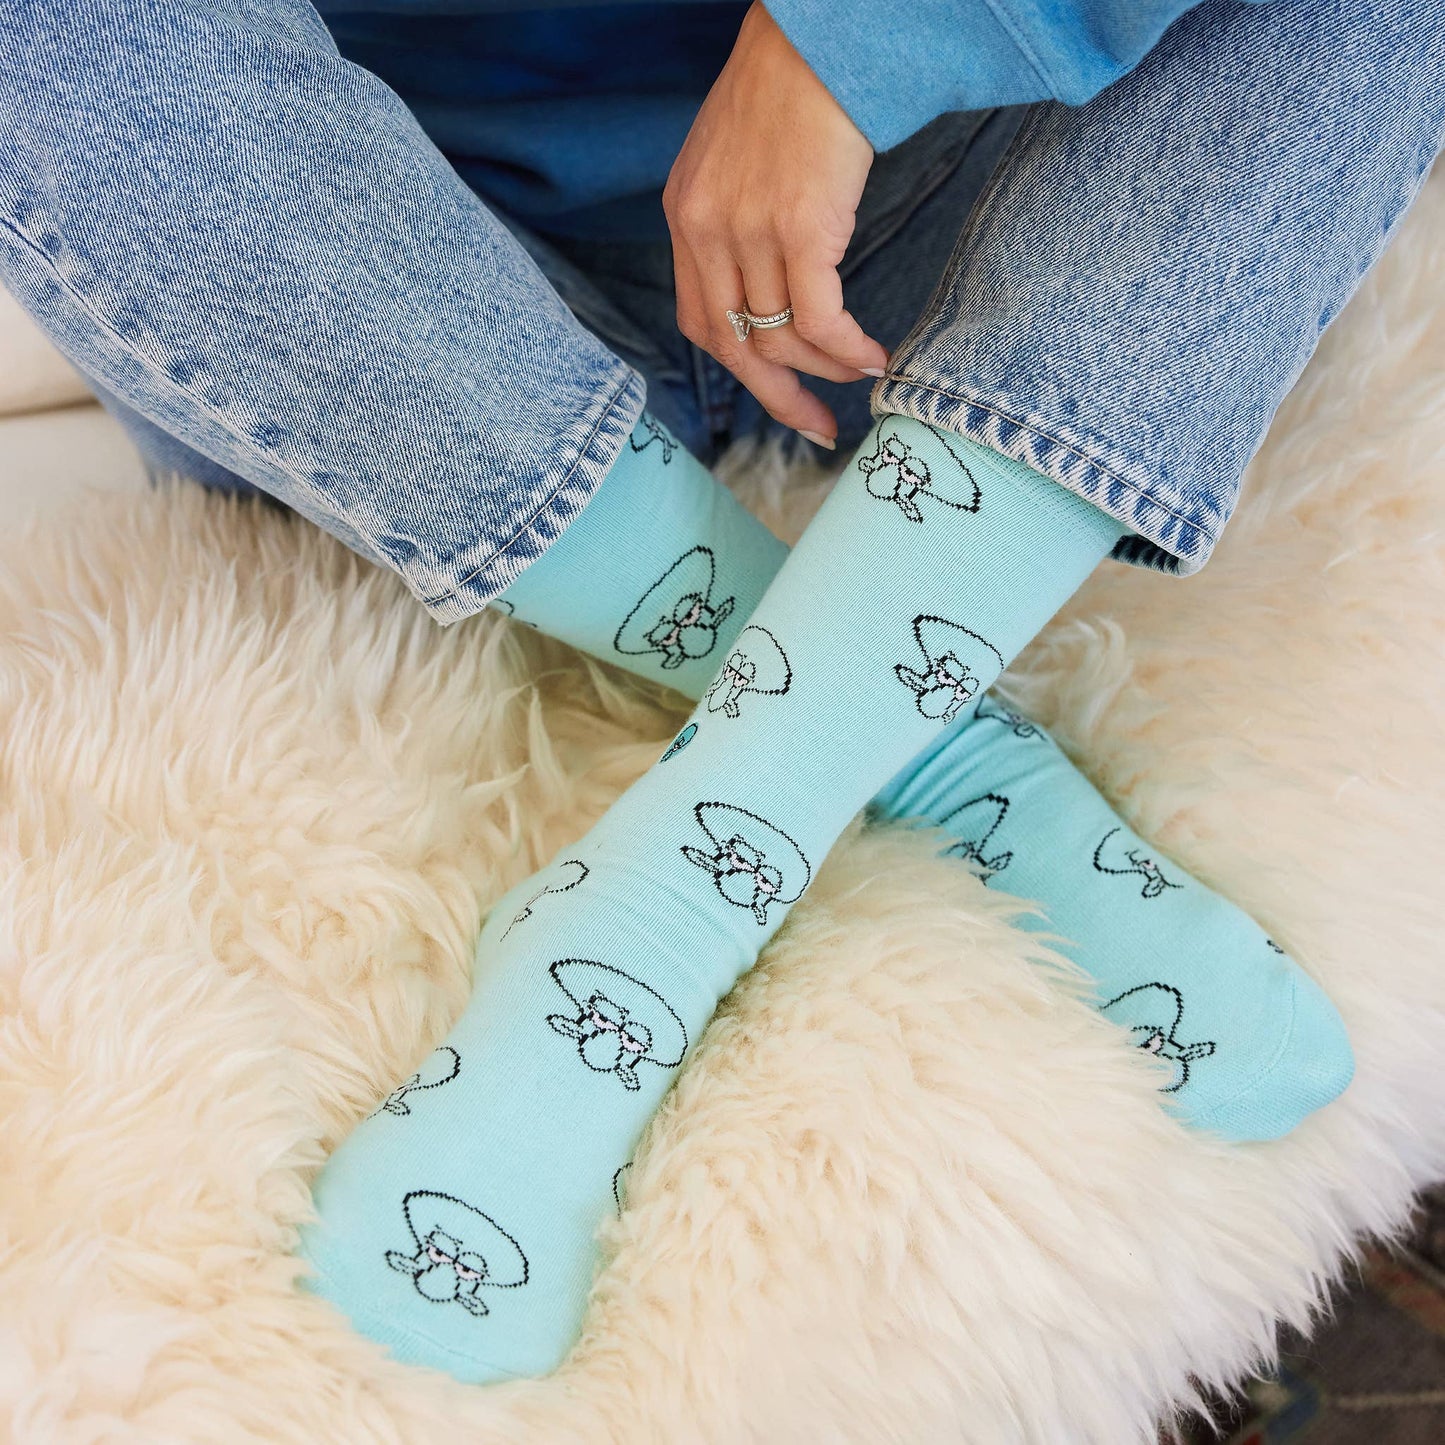 Conscious Step - Squidward Socks that Protect Oceans  Conscious Step   -better made easy-eco-friendly-sustainable-gifting